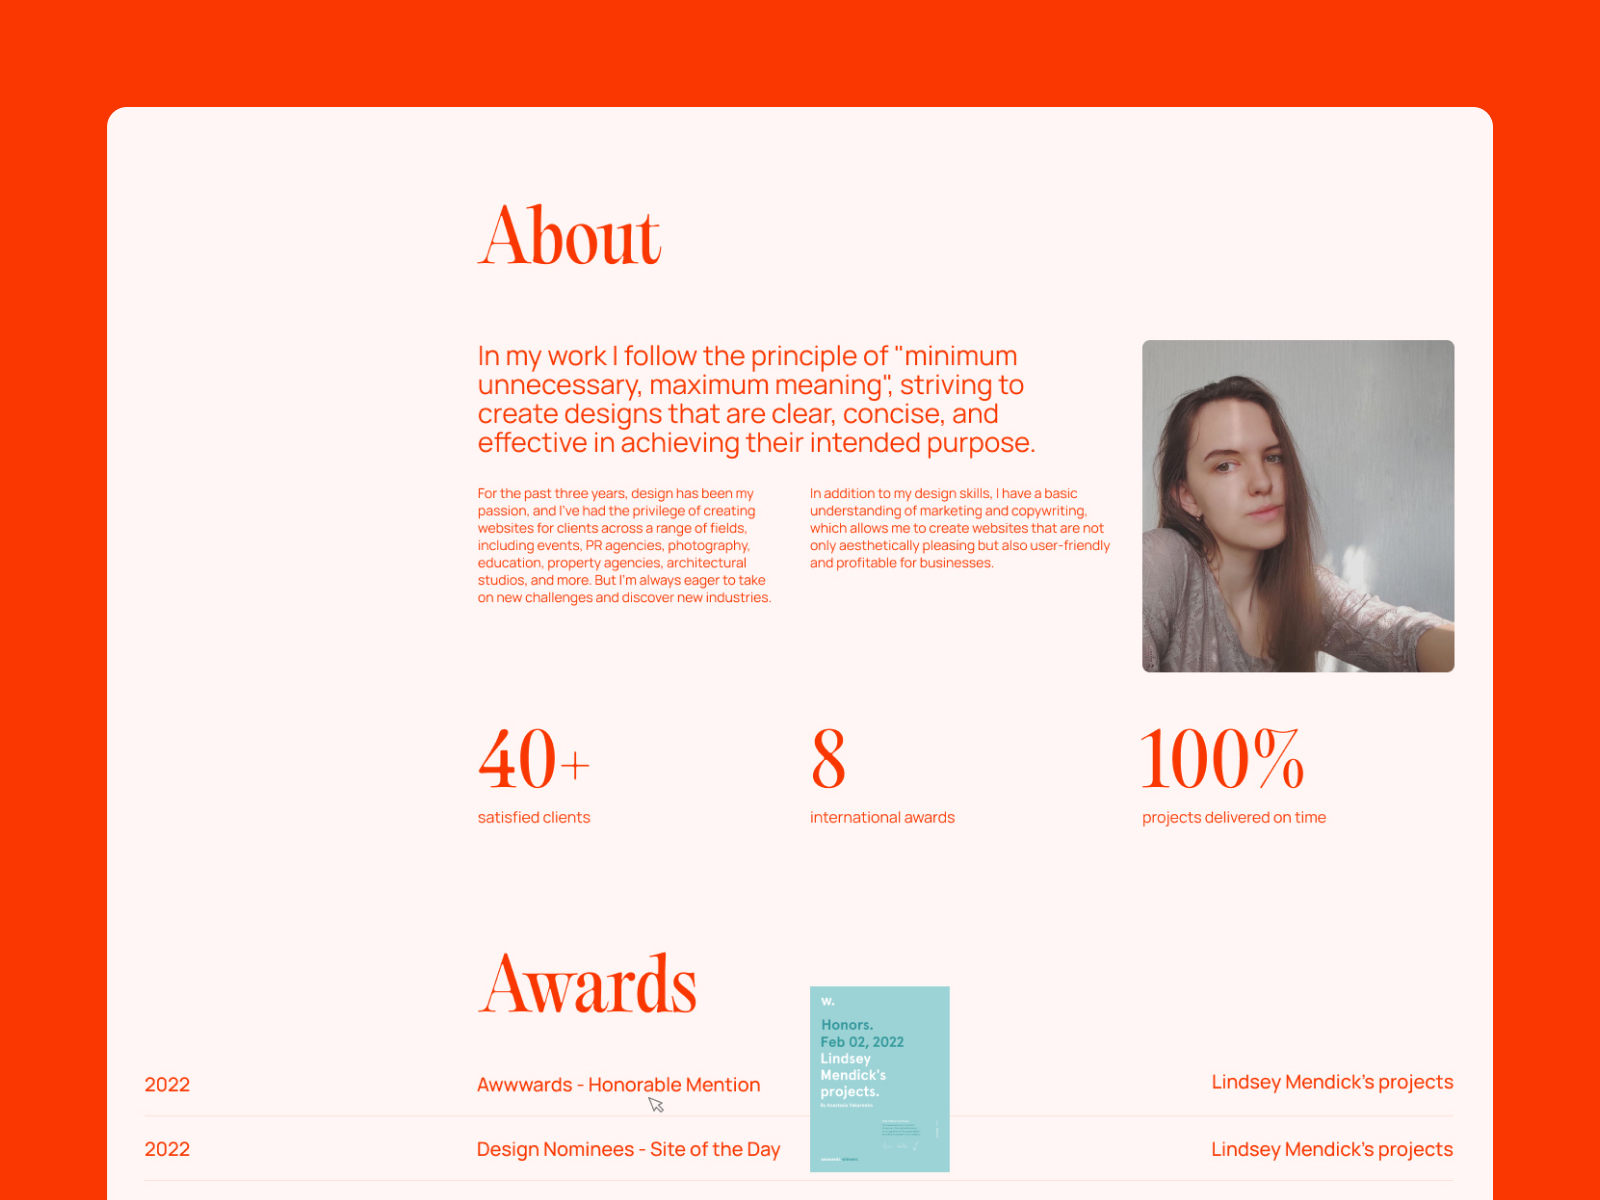 whil - Awwwards Honorable Mention